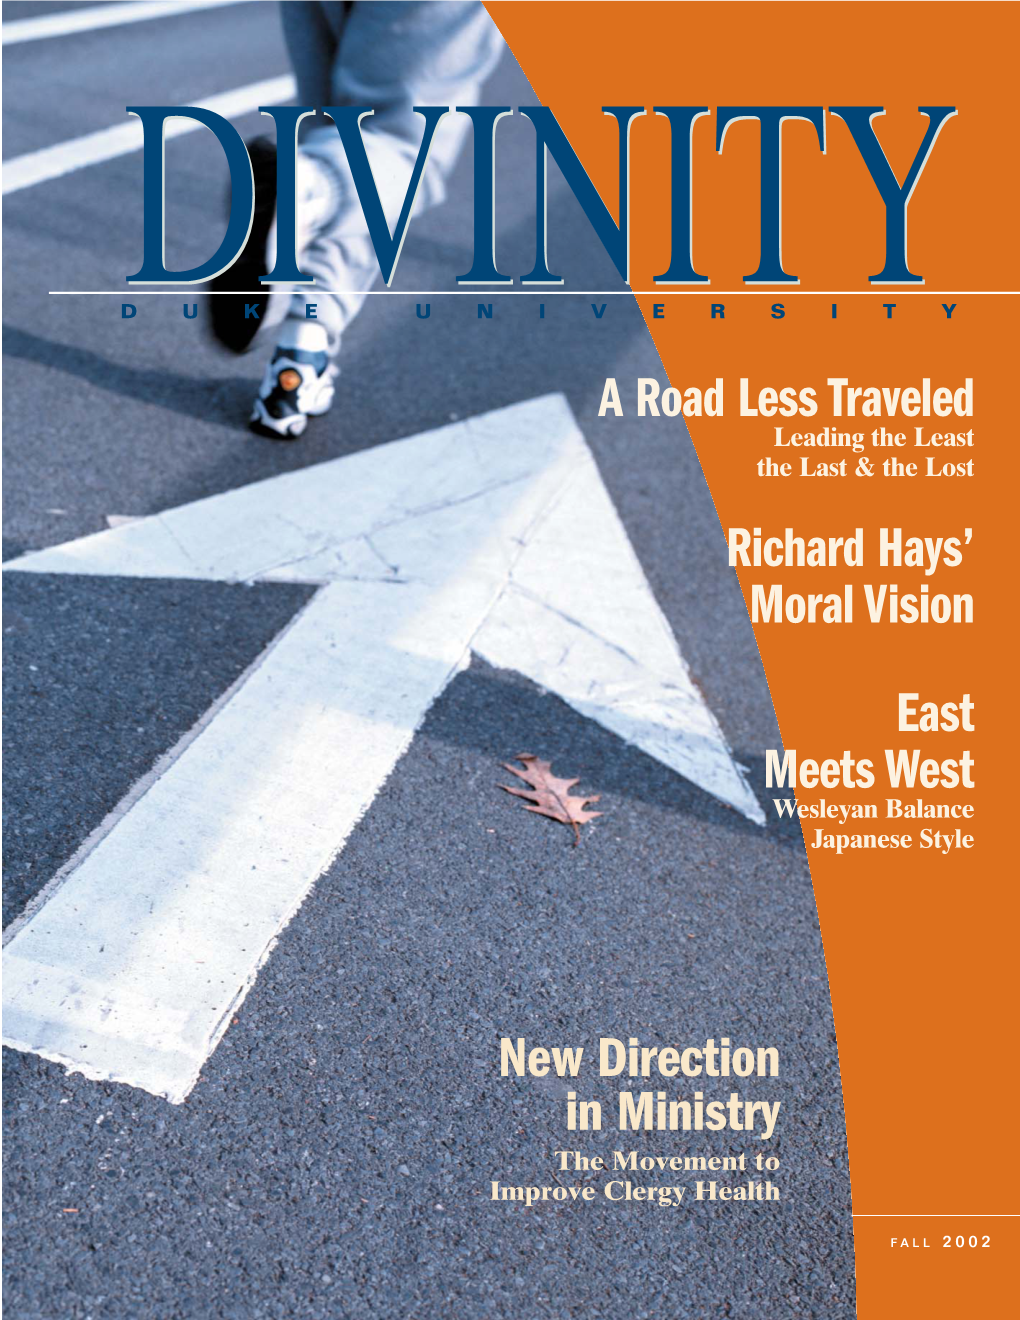 A Road Less Traveled Richard Hays' Moral Vision East Meets West New